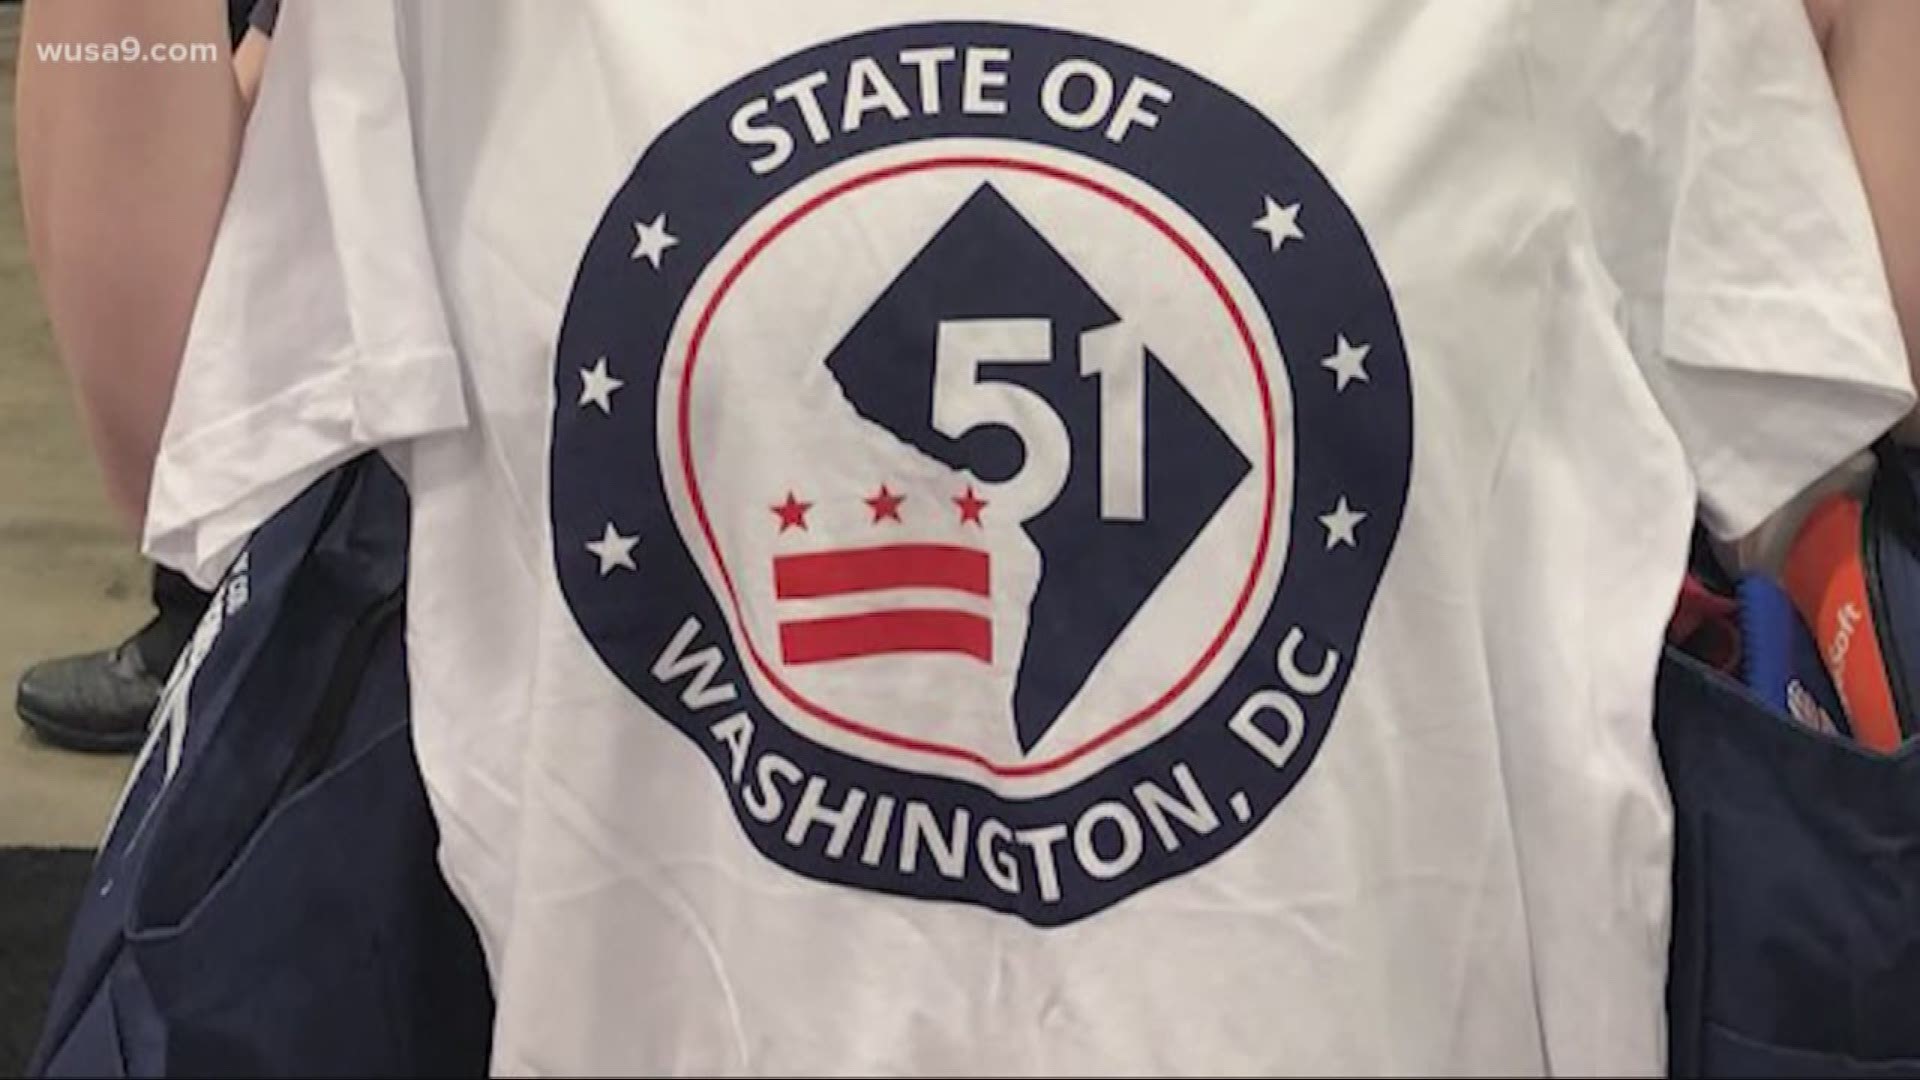 The city's latest push to make the District of Columbia the country's 51st state is a charm offensive, with tax dollars being spent on everything from mobile apps to M&M's to try and build support for giving District residents full representation in Congr